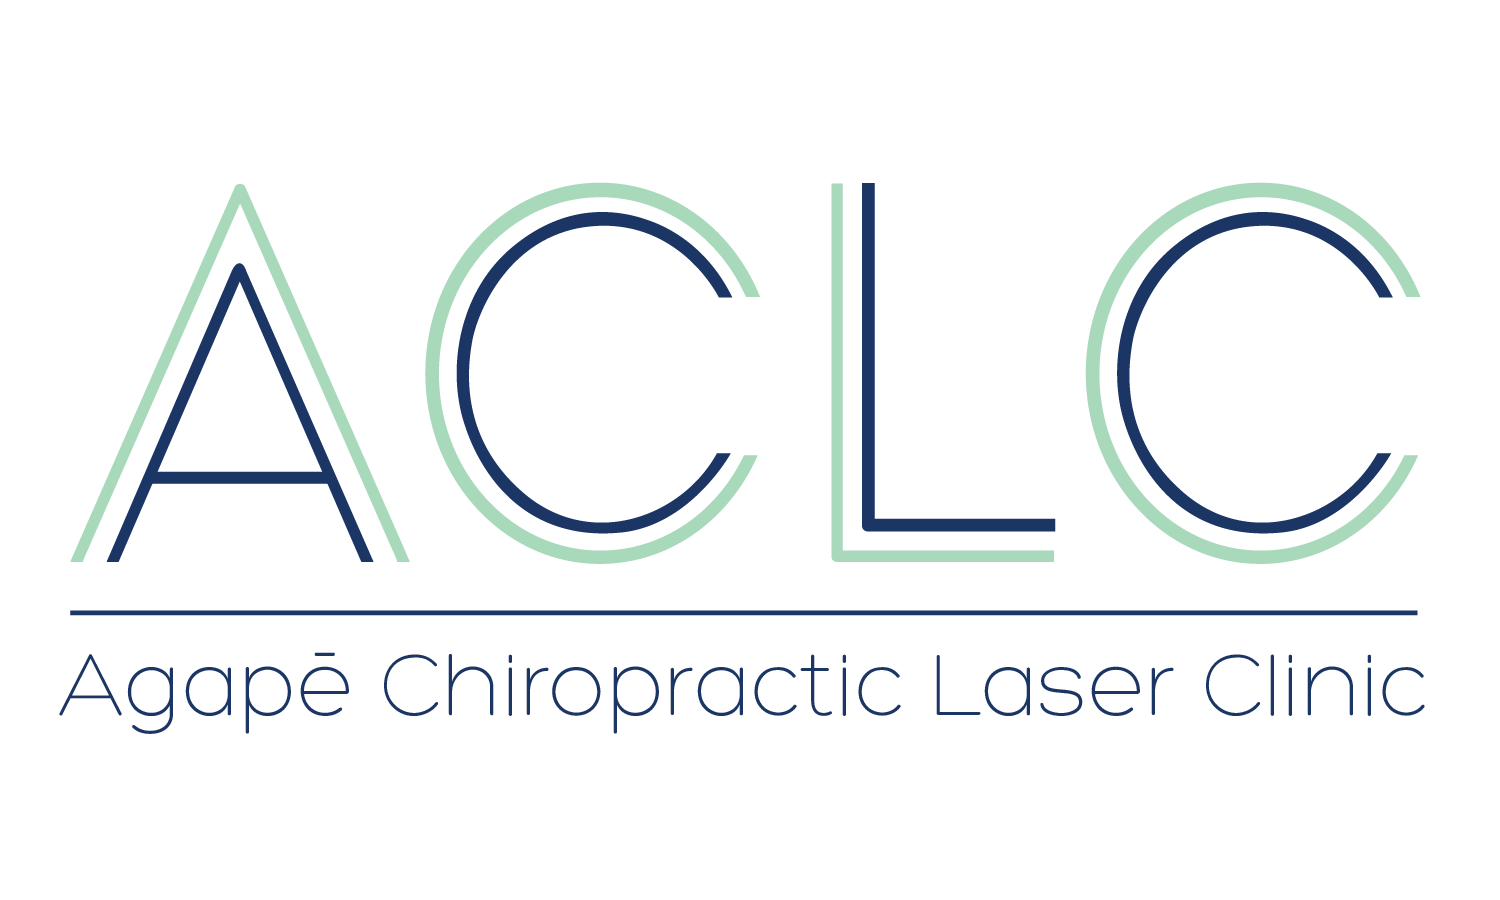 Agape Chiropractic and Laser Clinic